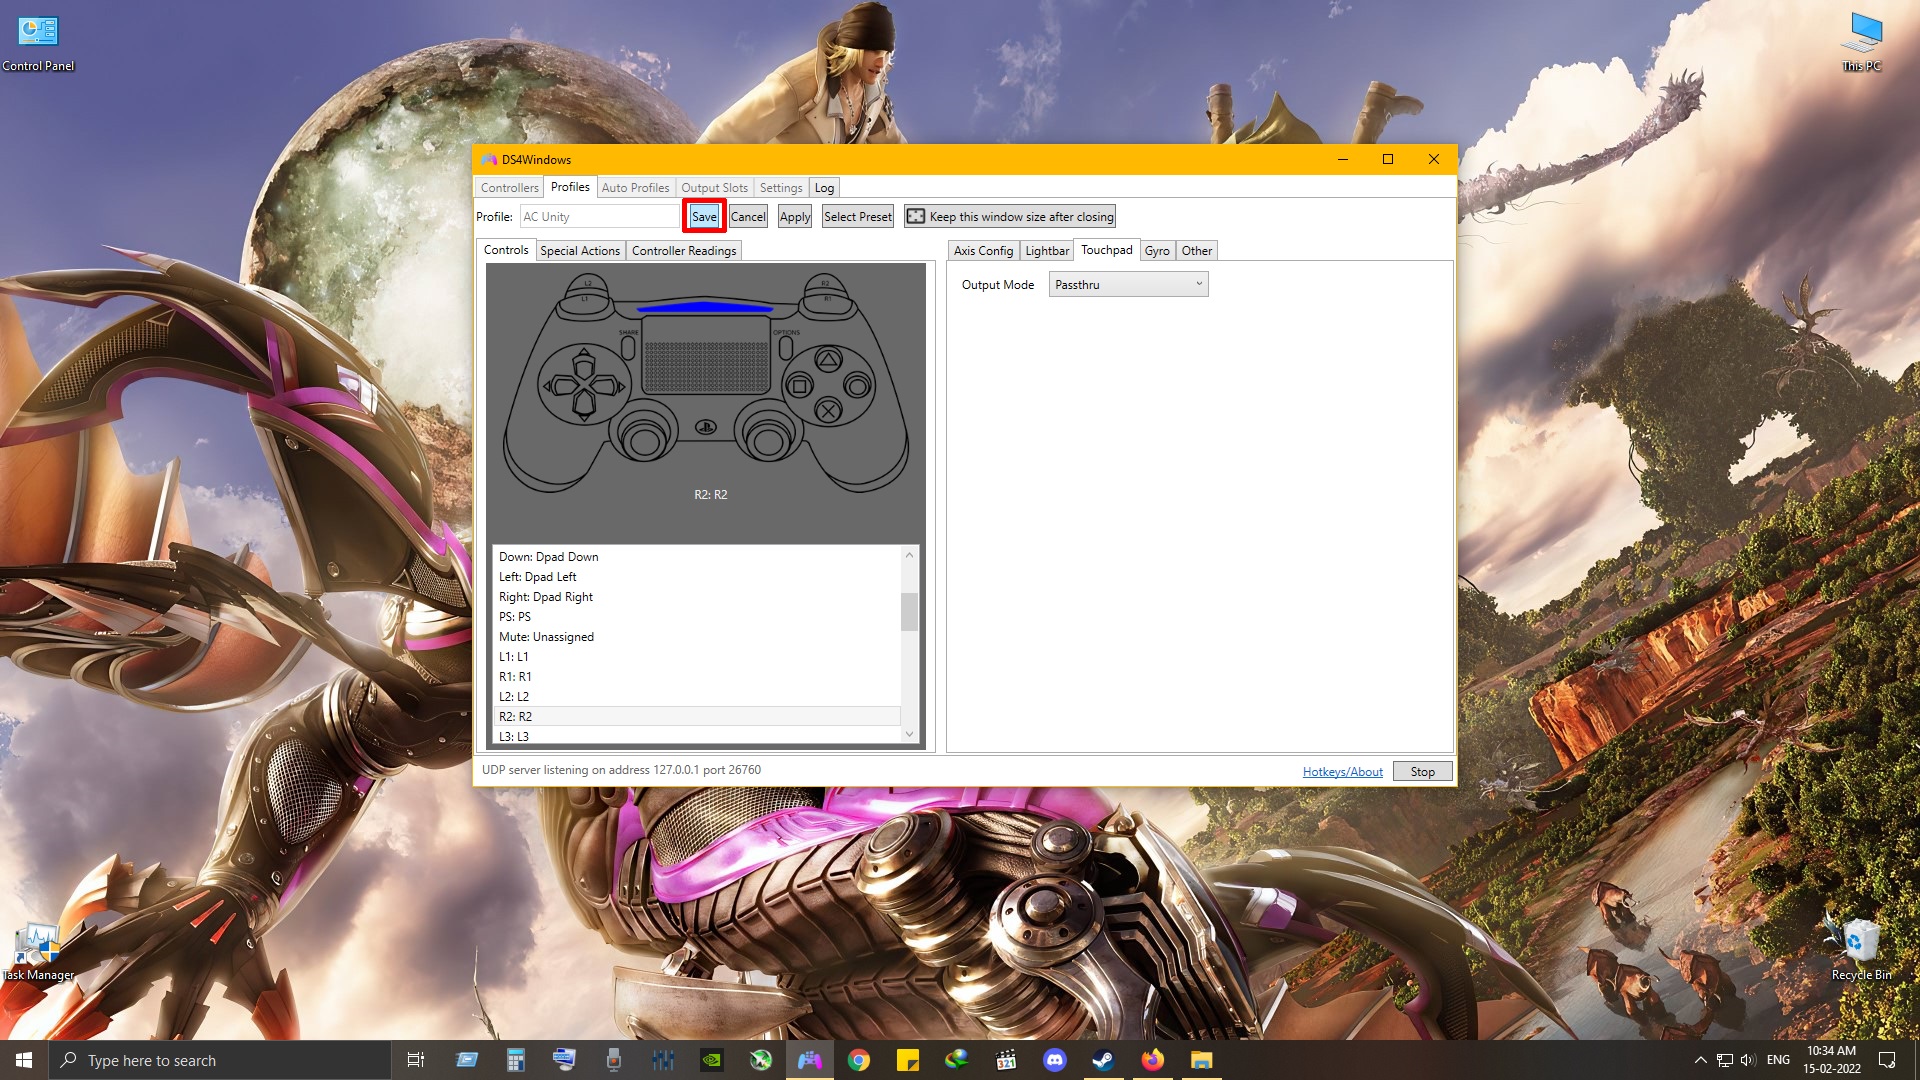 Assassin's Creed Unity Playstation Button Prompts with DS4 v2 Controller - Step 2: Using DS4Windows - 235597D